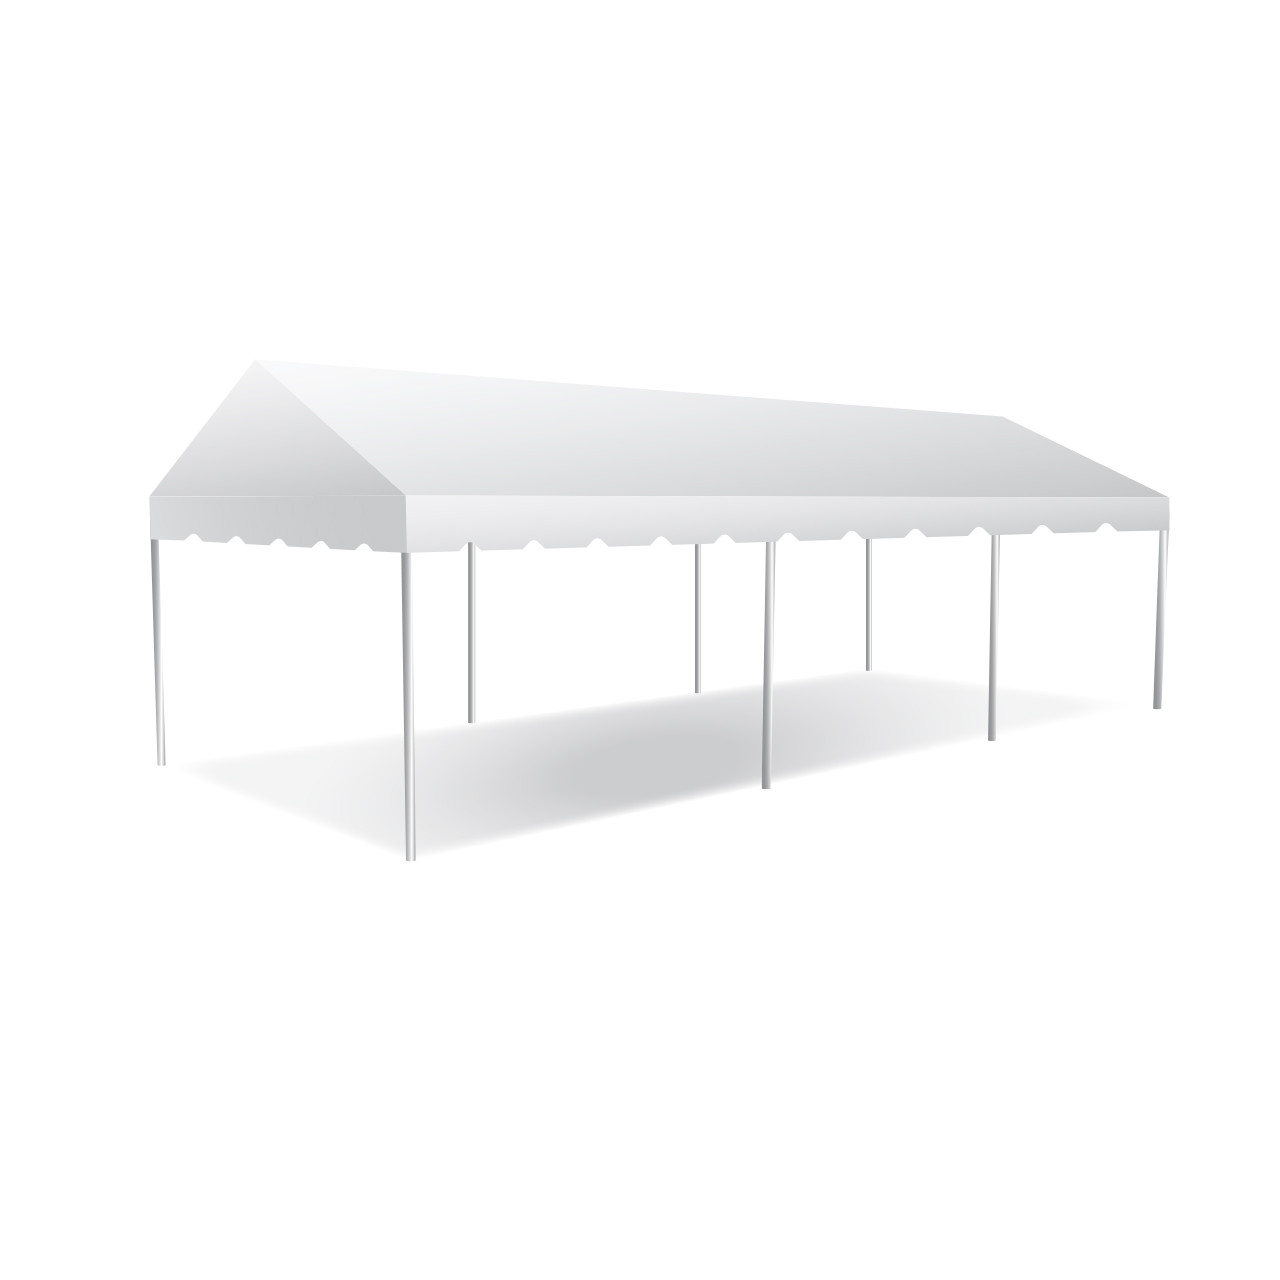 12' x 30' Classic Series Gable End Frame Tent, 1 Piece Tent Top, Complete